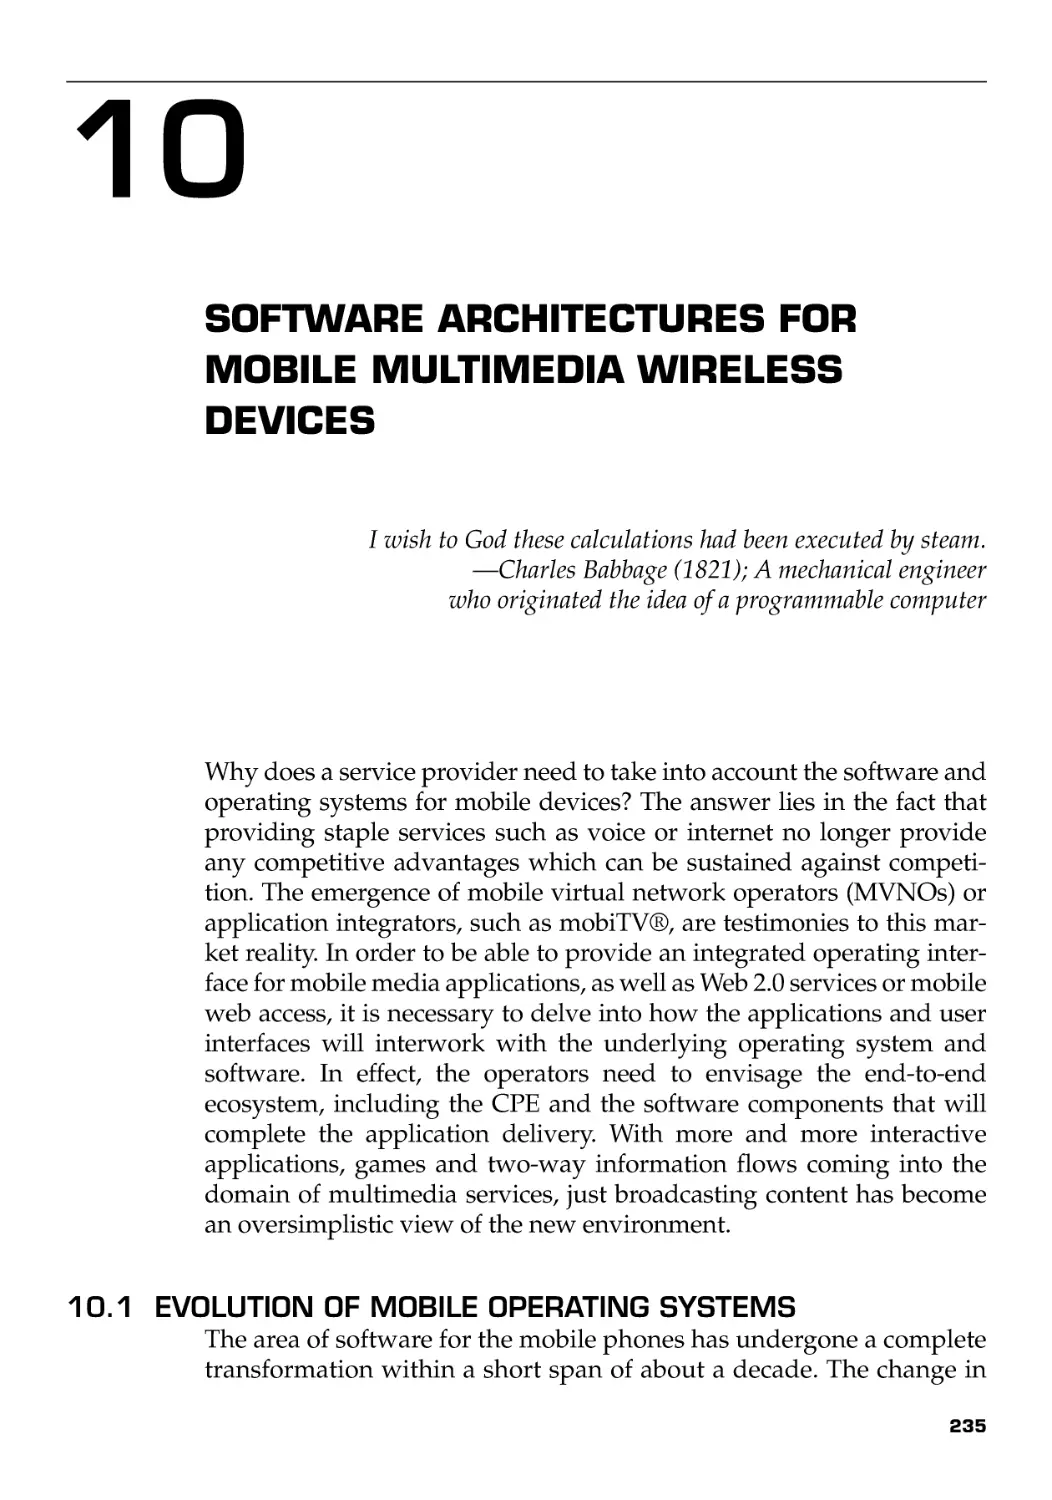 Chapter 10
10.1 Evolution of Mobile Operating Systems